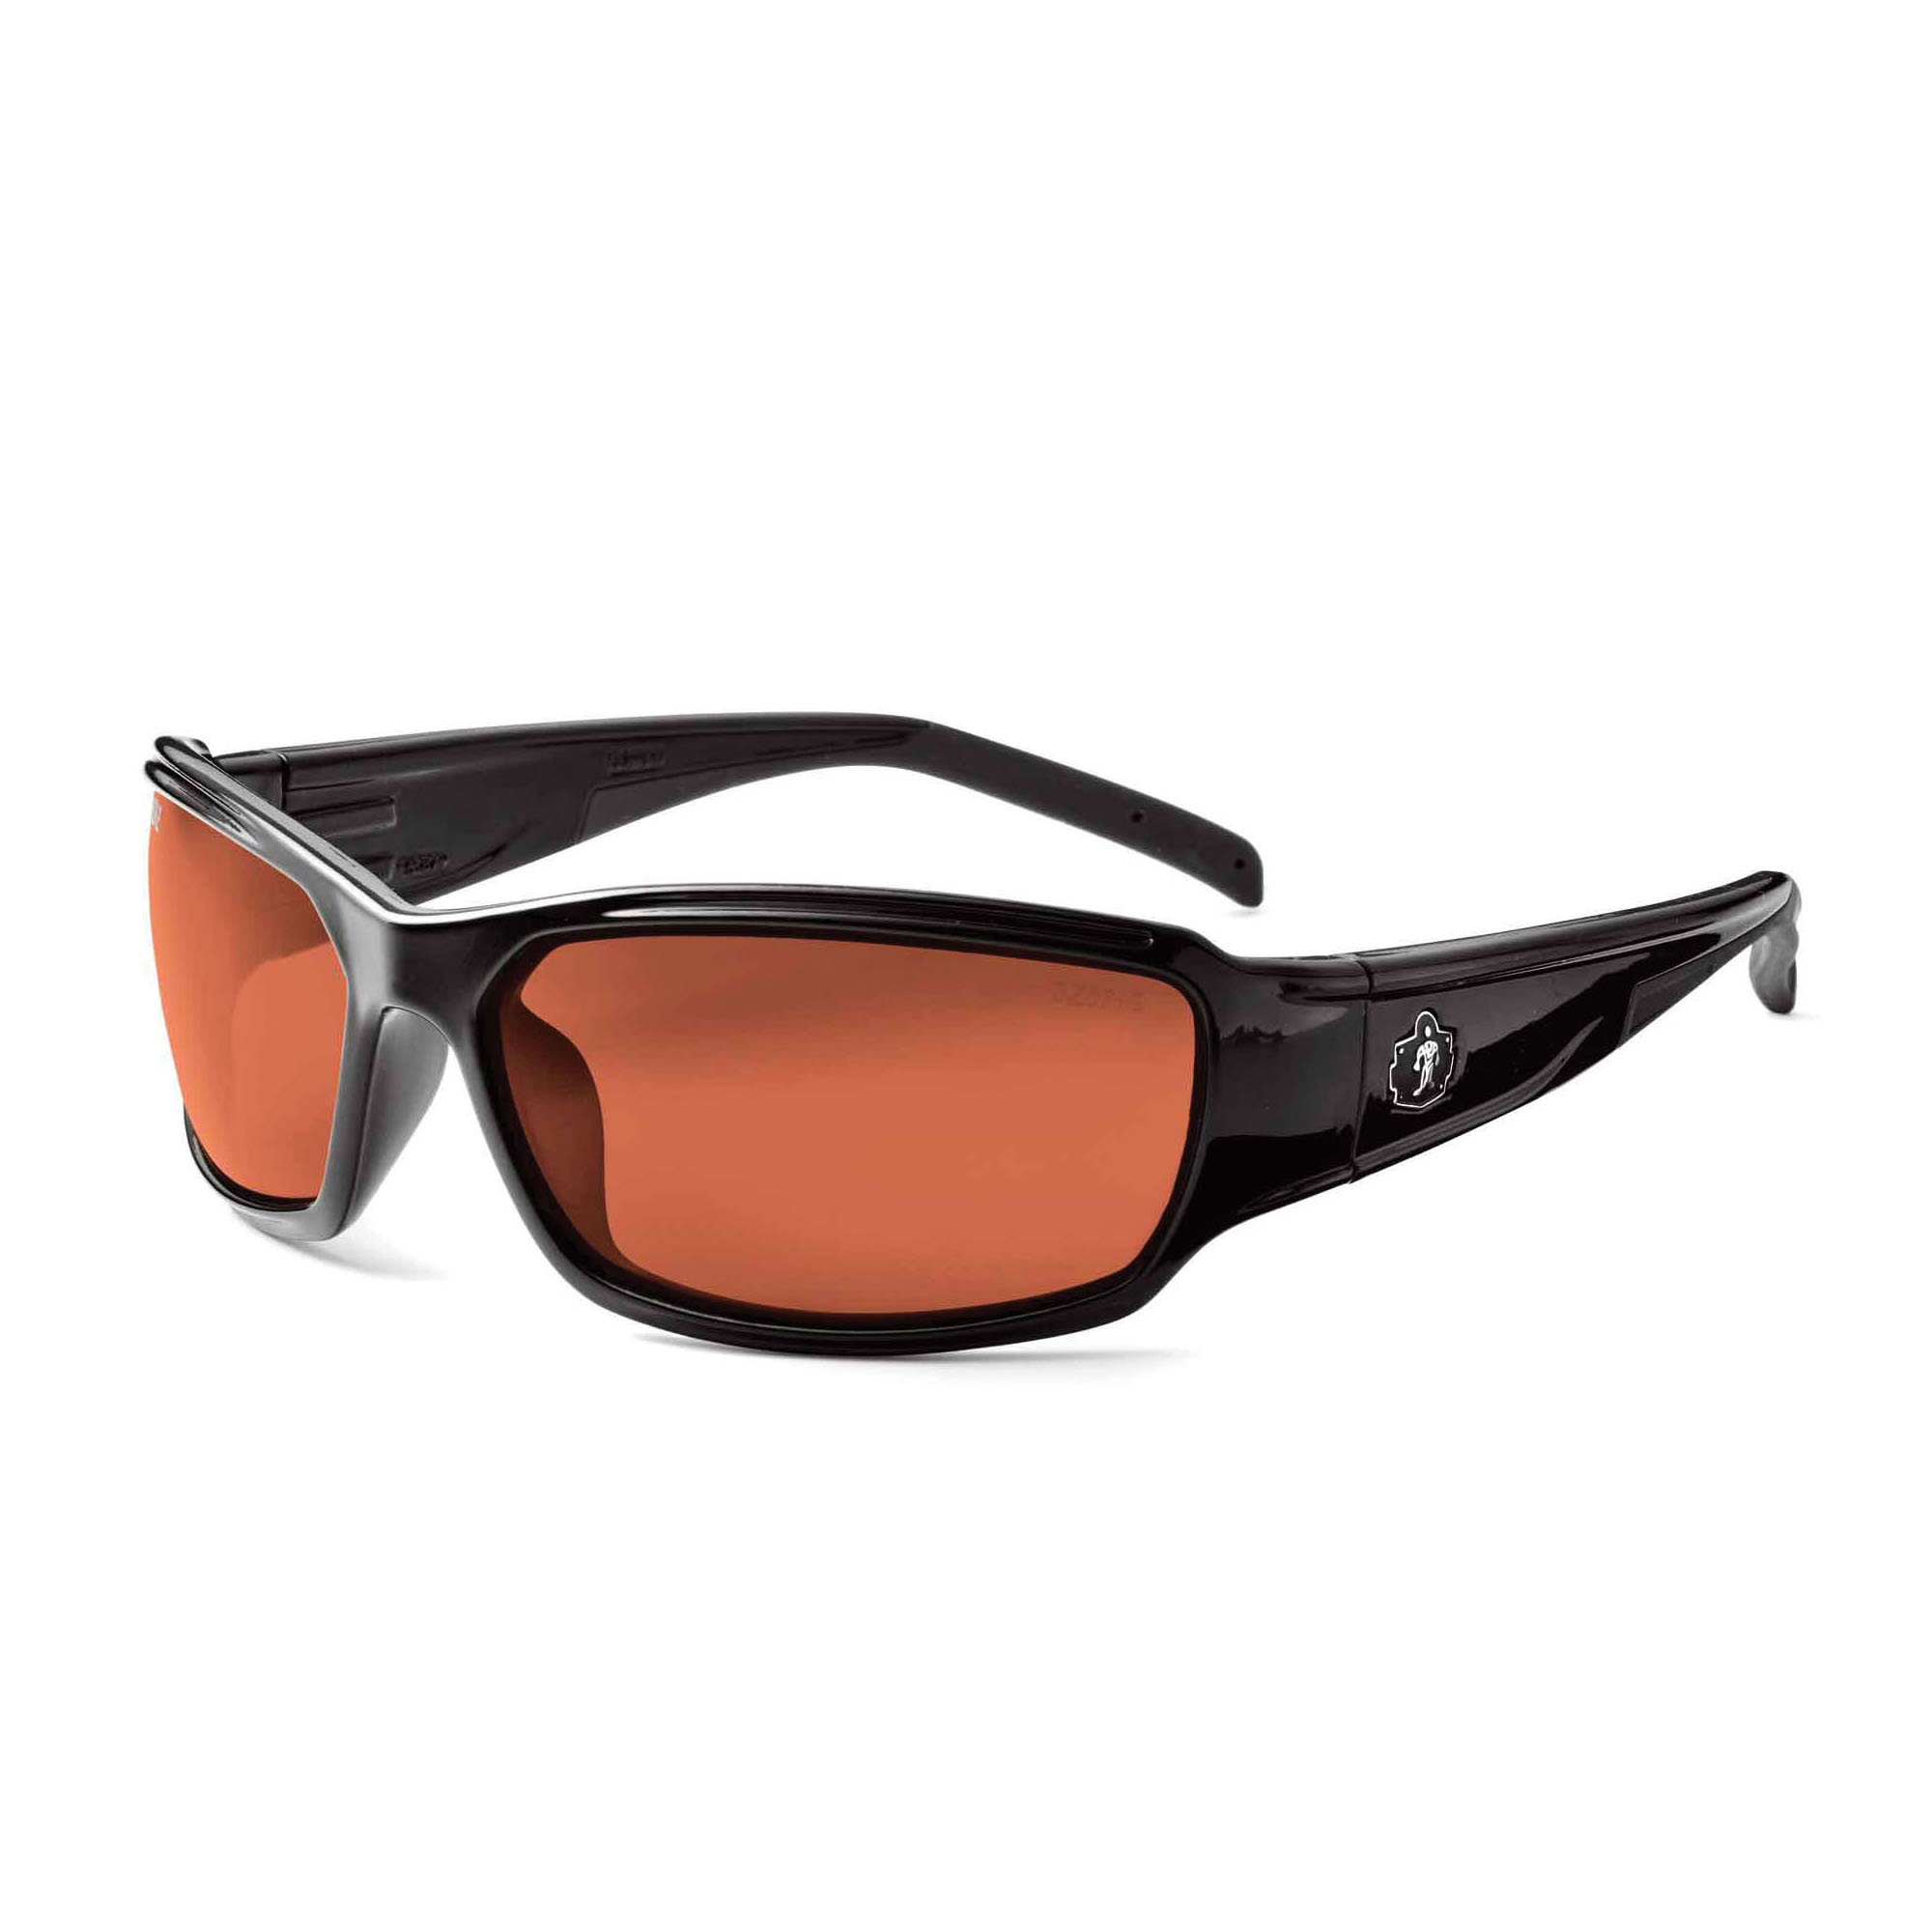 THOR COPR SAFETY GLASSES